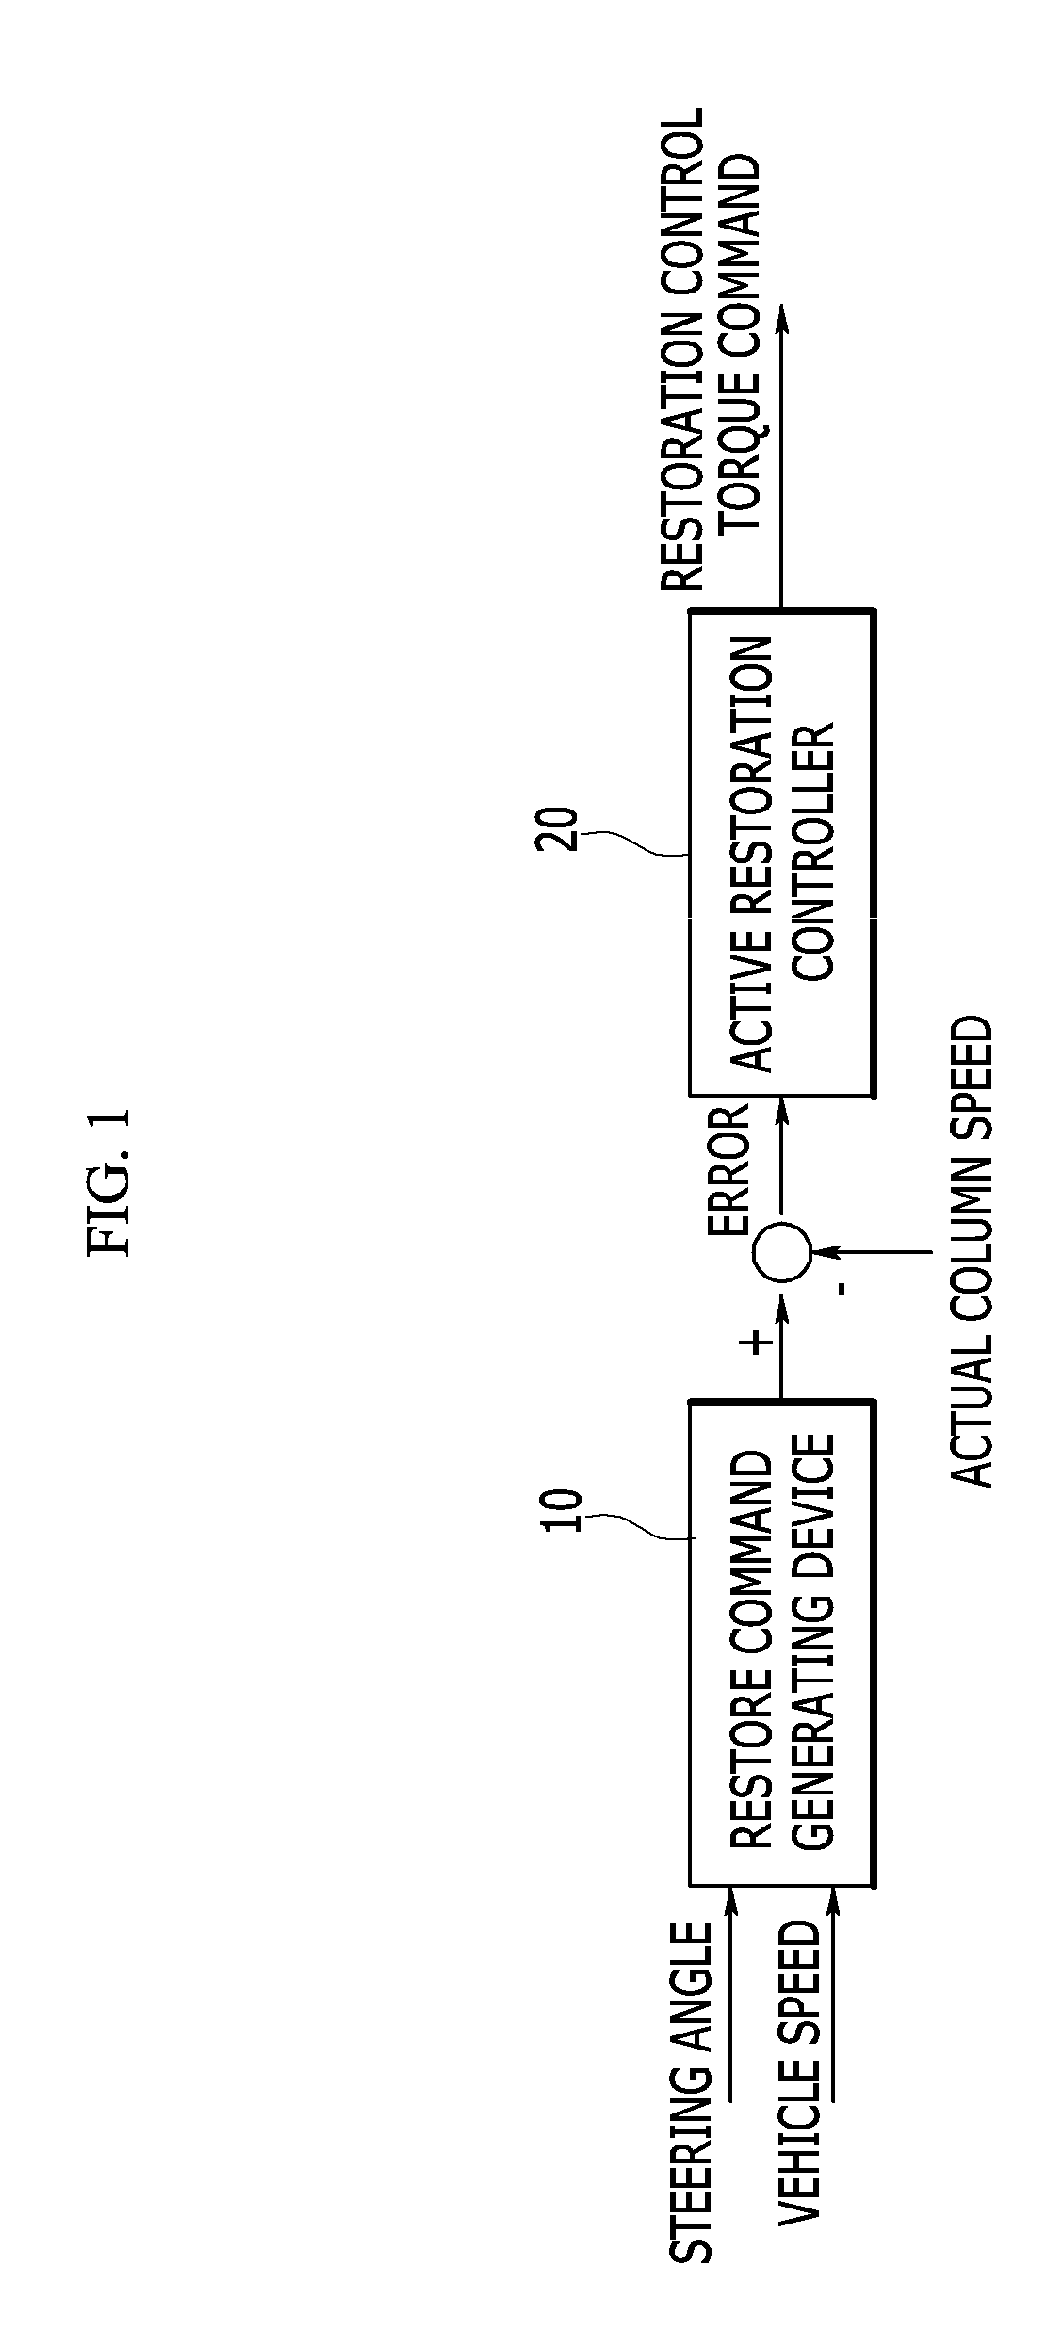 Device for controlling restoration of MDPS system